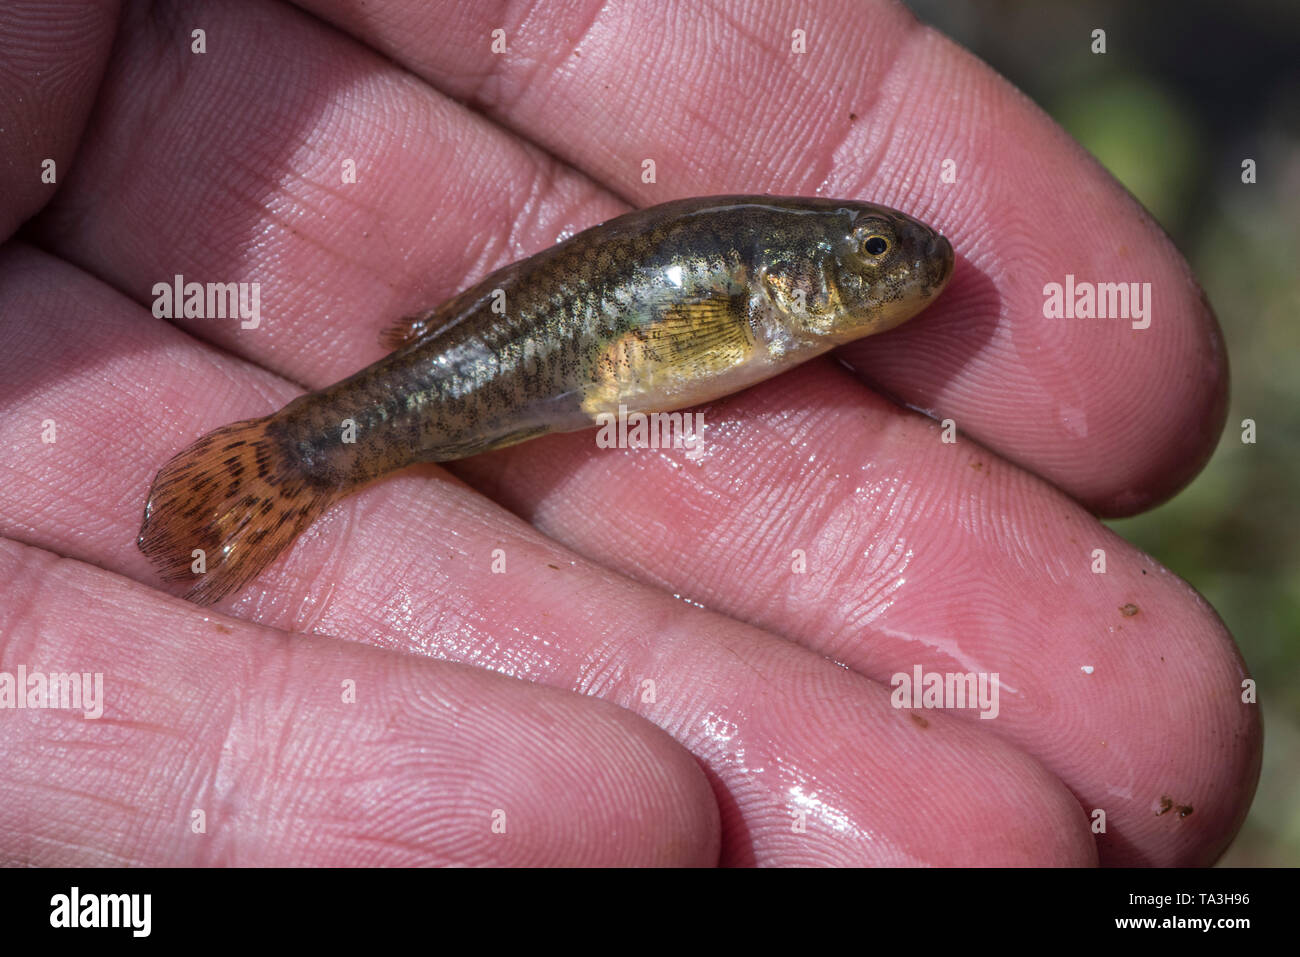 A pupfish (Orestias sp.) from the high elevation Andes in Southern Peru. Fish in this genus are nearly all threatened and endemic to small areas. Stock Photo